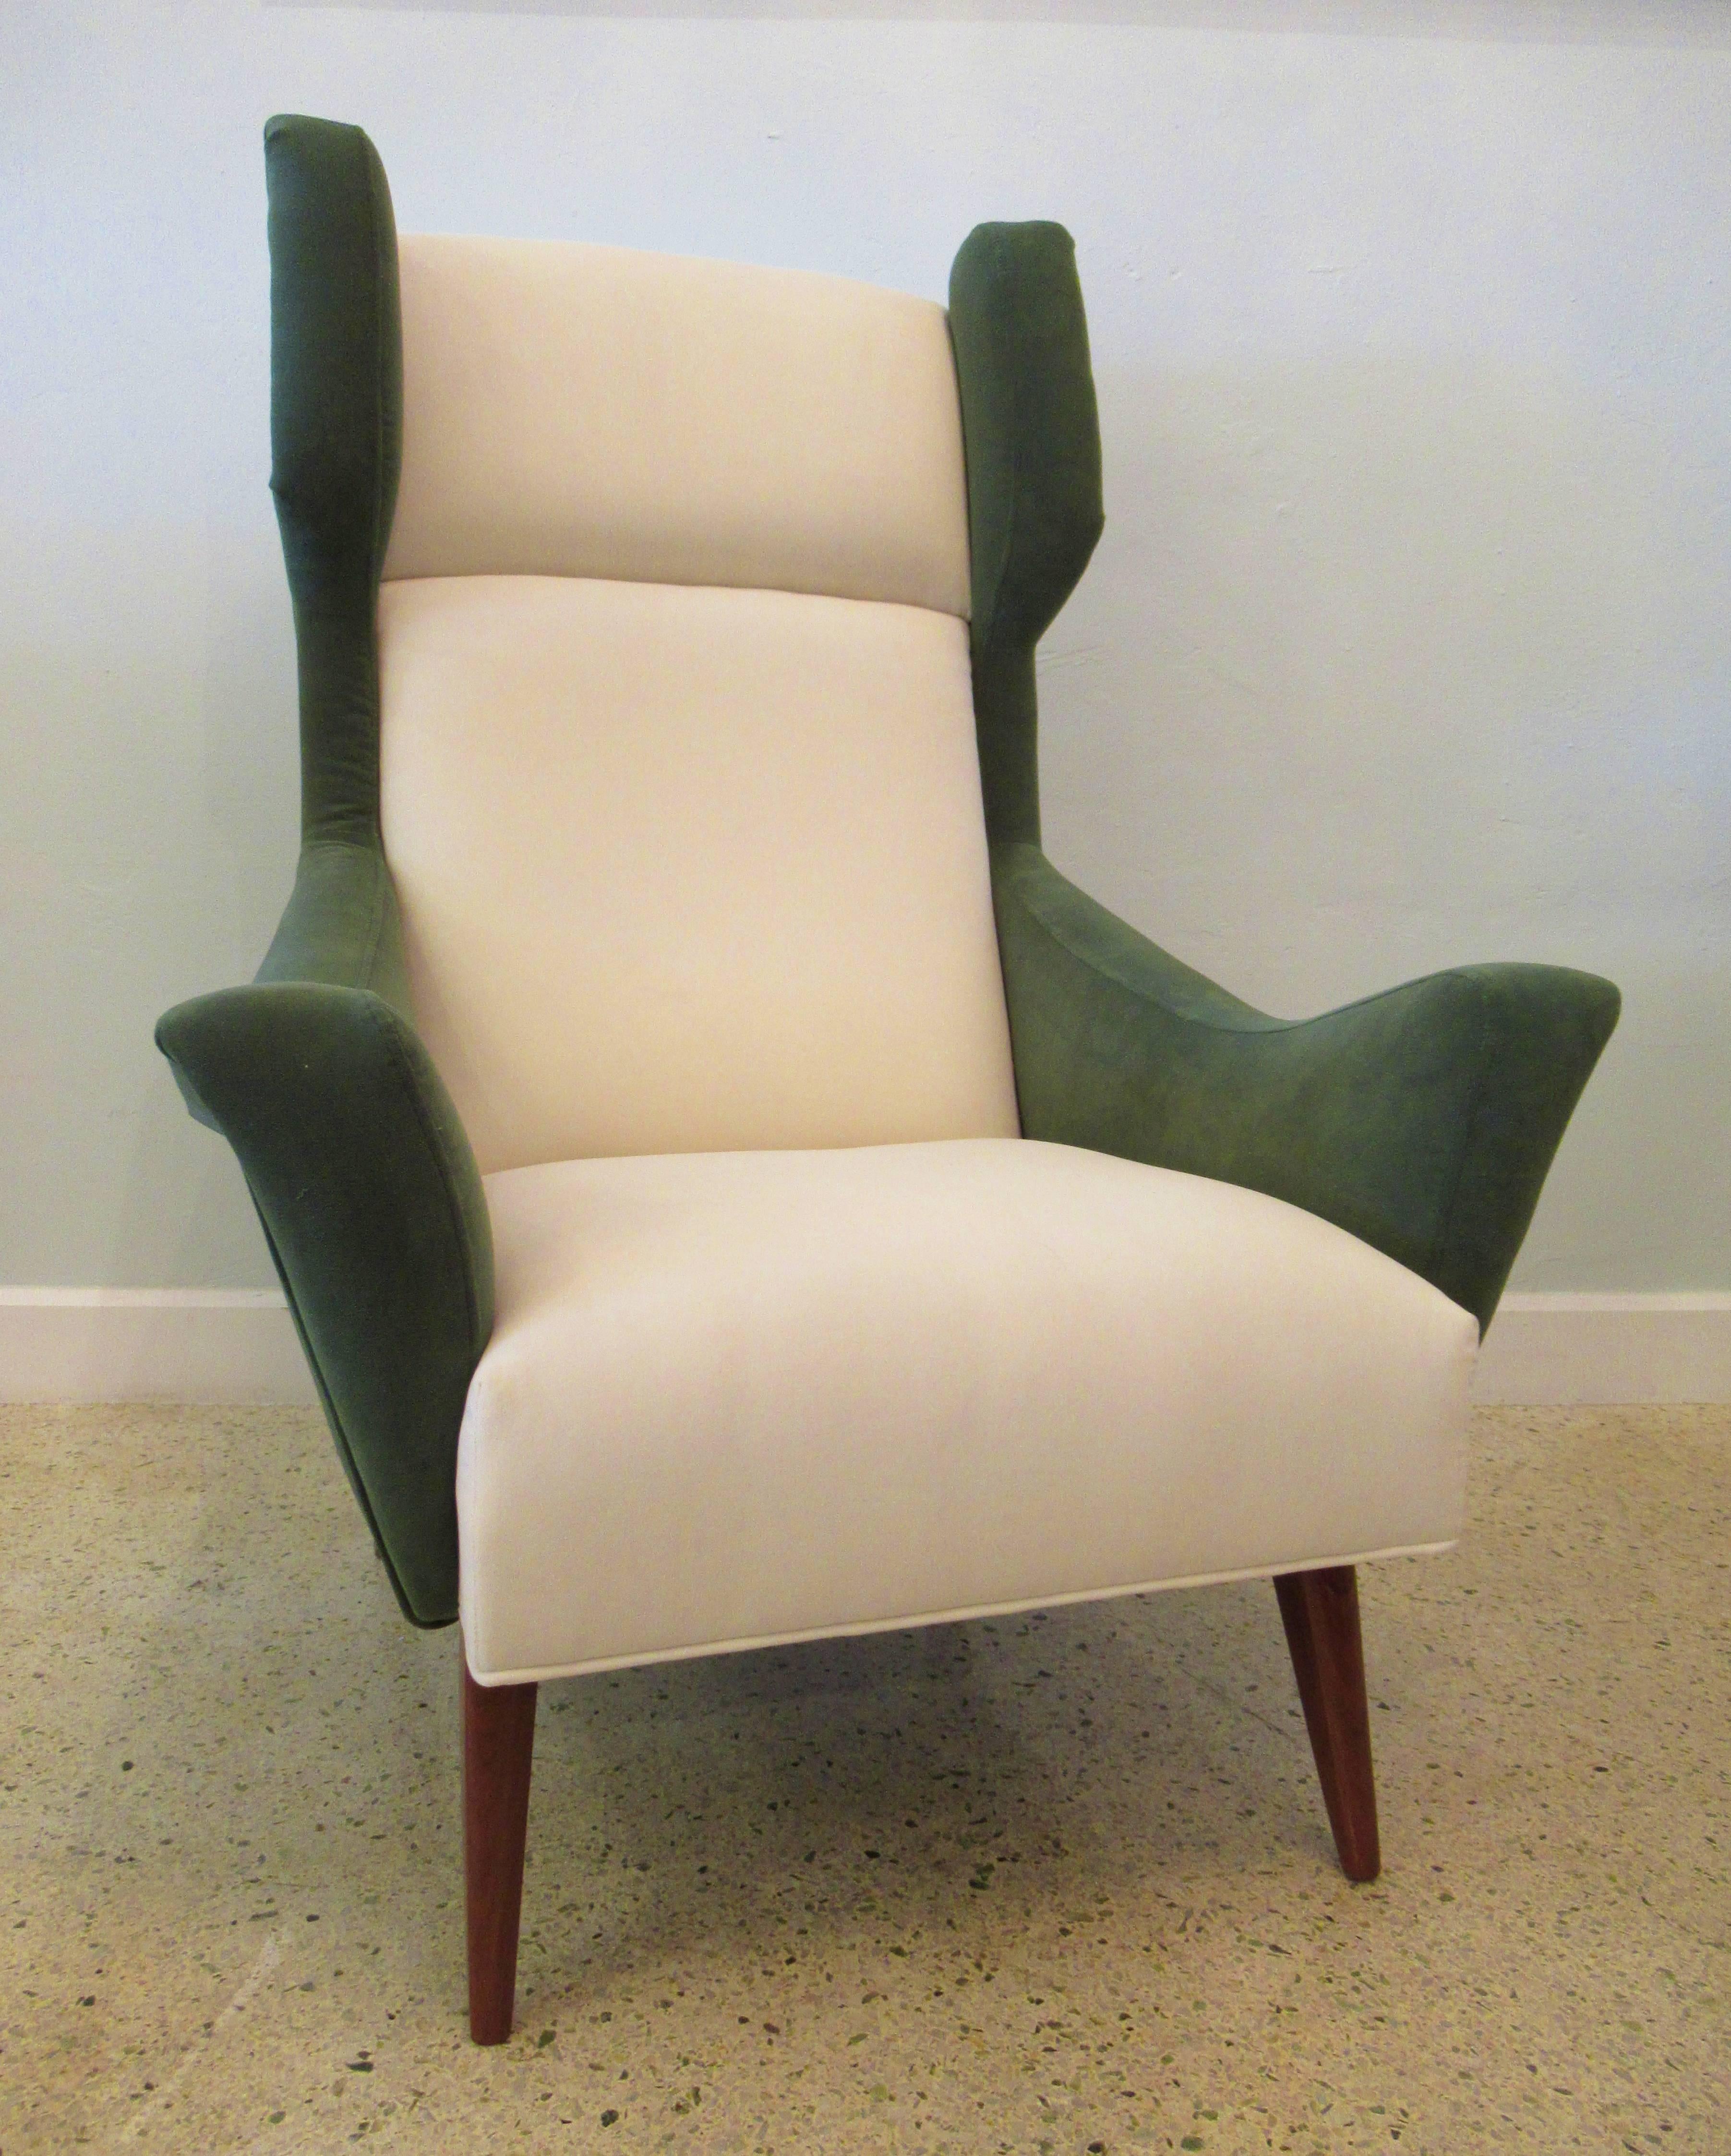 Italian Modern Upholstered Wing Chair, Gio Ponti, 1950's For Sale 3